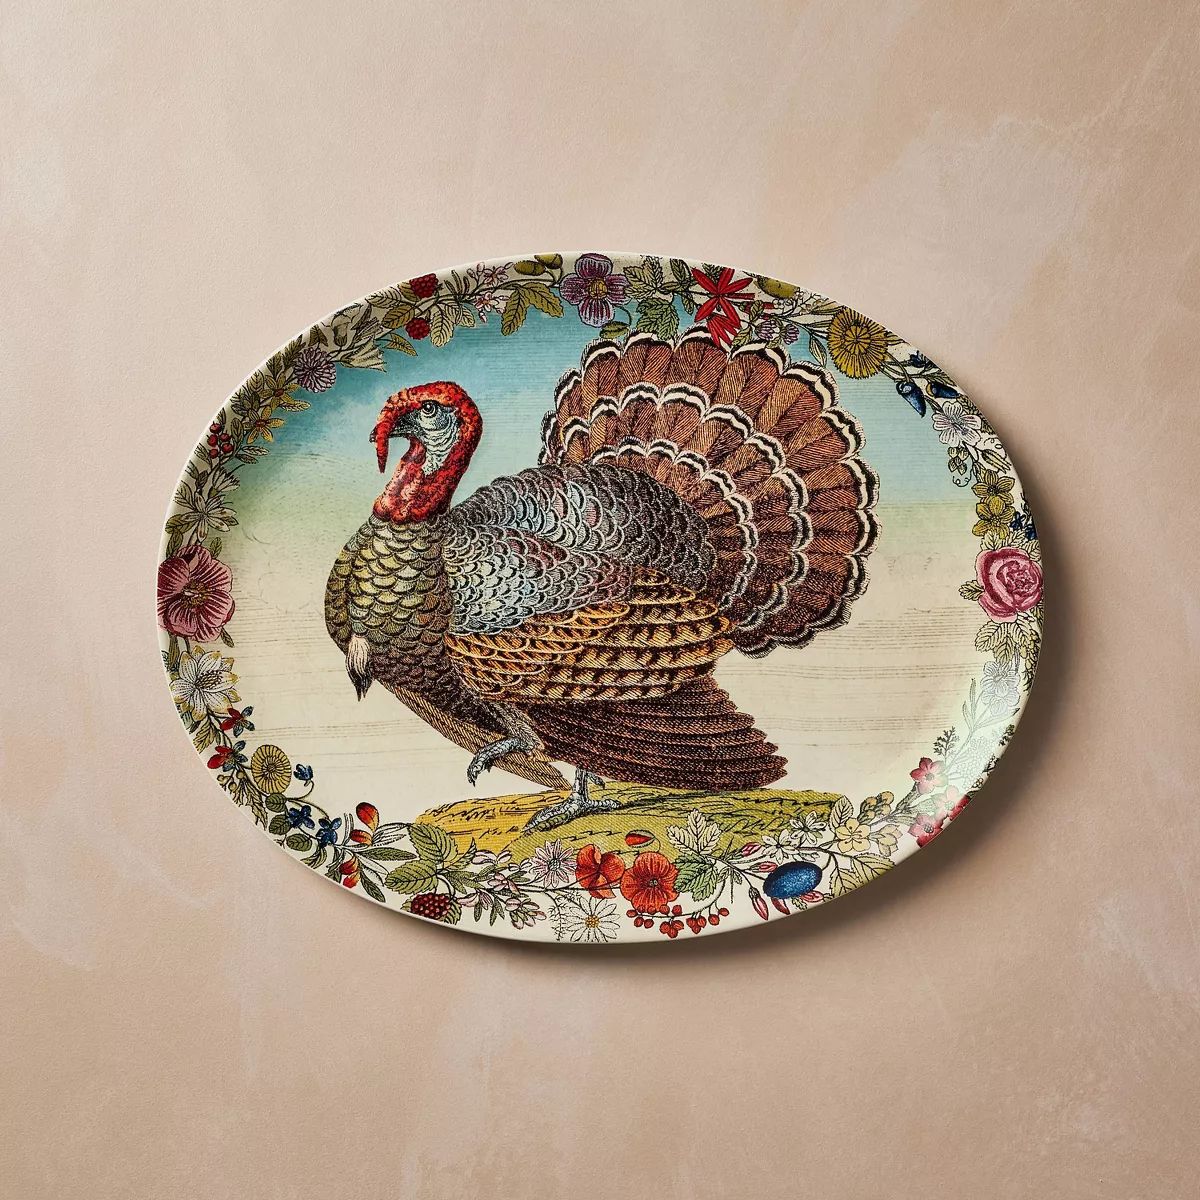 14"x18" Oval Stoneware Platter Fall Turkey with Floral Border - John Derian for Target | Target